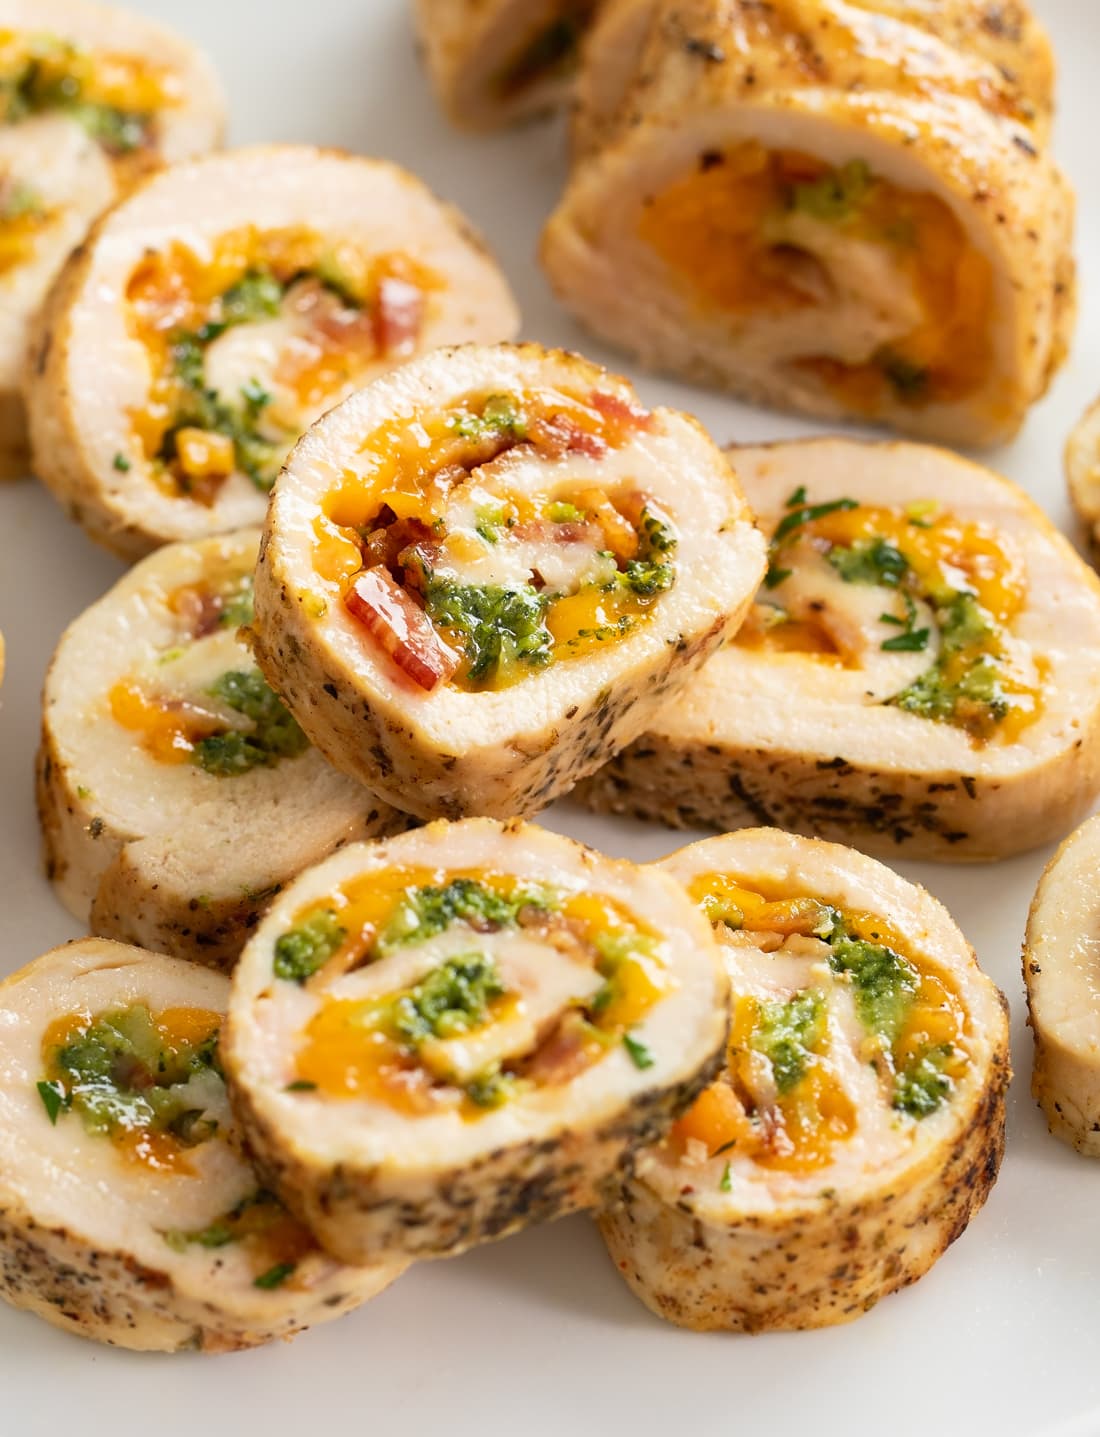 Slices of Chicken Roulade filled with Cheese, Broccoli, and Bacon.